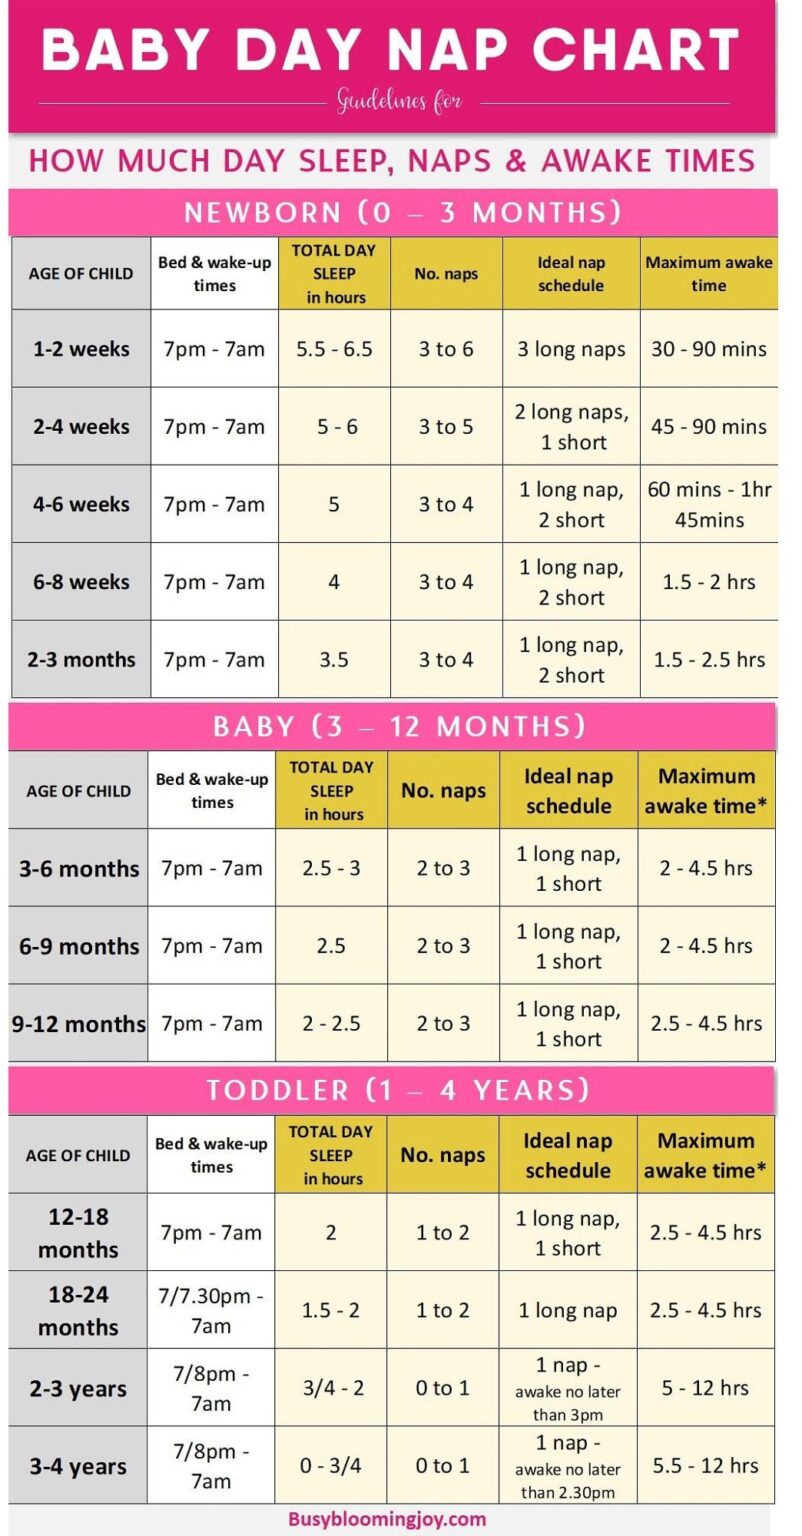 Guideline for Newborn Baby Toddler Day Nap Chart - StudyPK